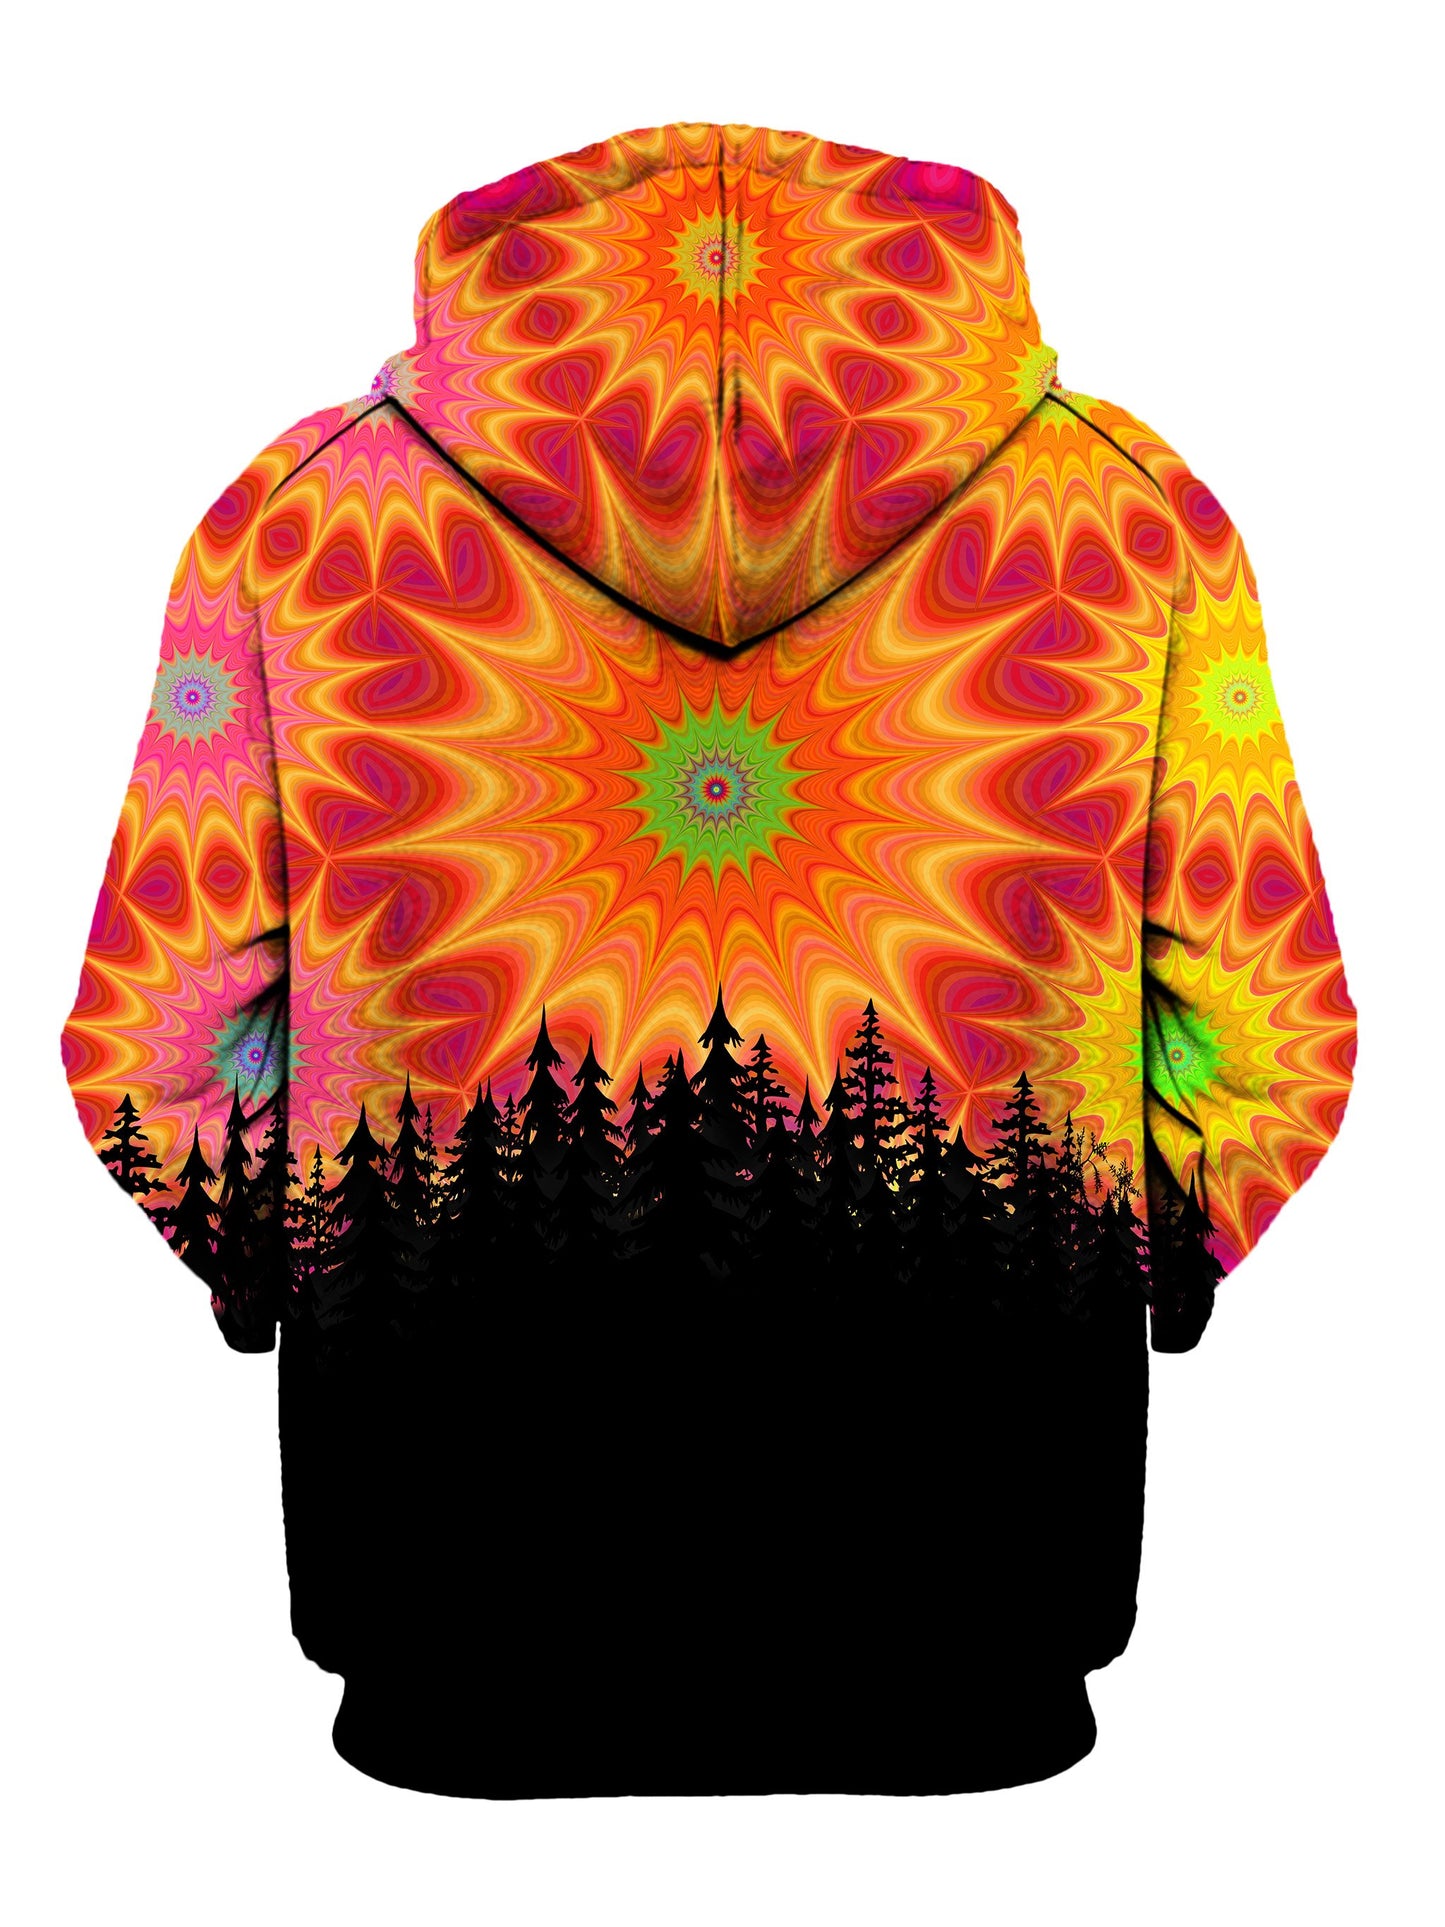 Back view of all over print psychedelic nature hoody by Gratefully Dyed Apparel. 